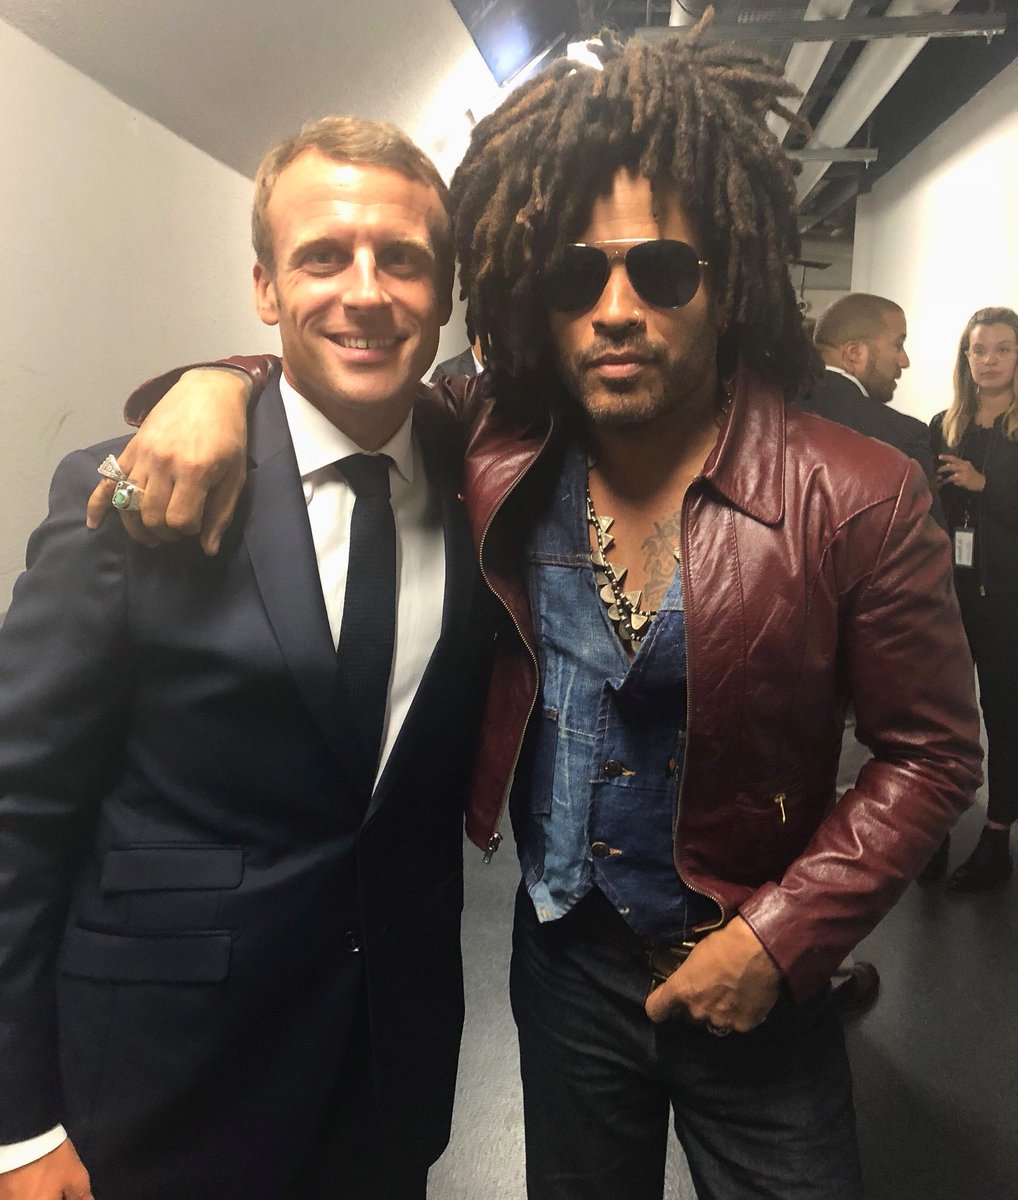 When you run into the president backstage at the @U2 show in Paris. @emmanuelmacron https://t.co/LUbsVz4ZY1